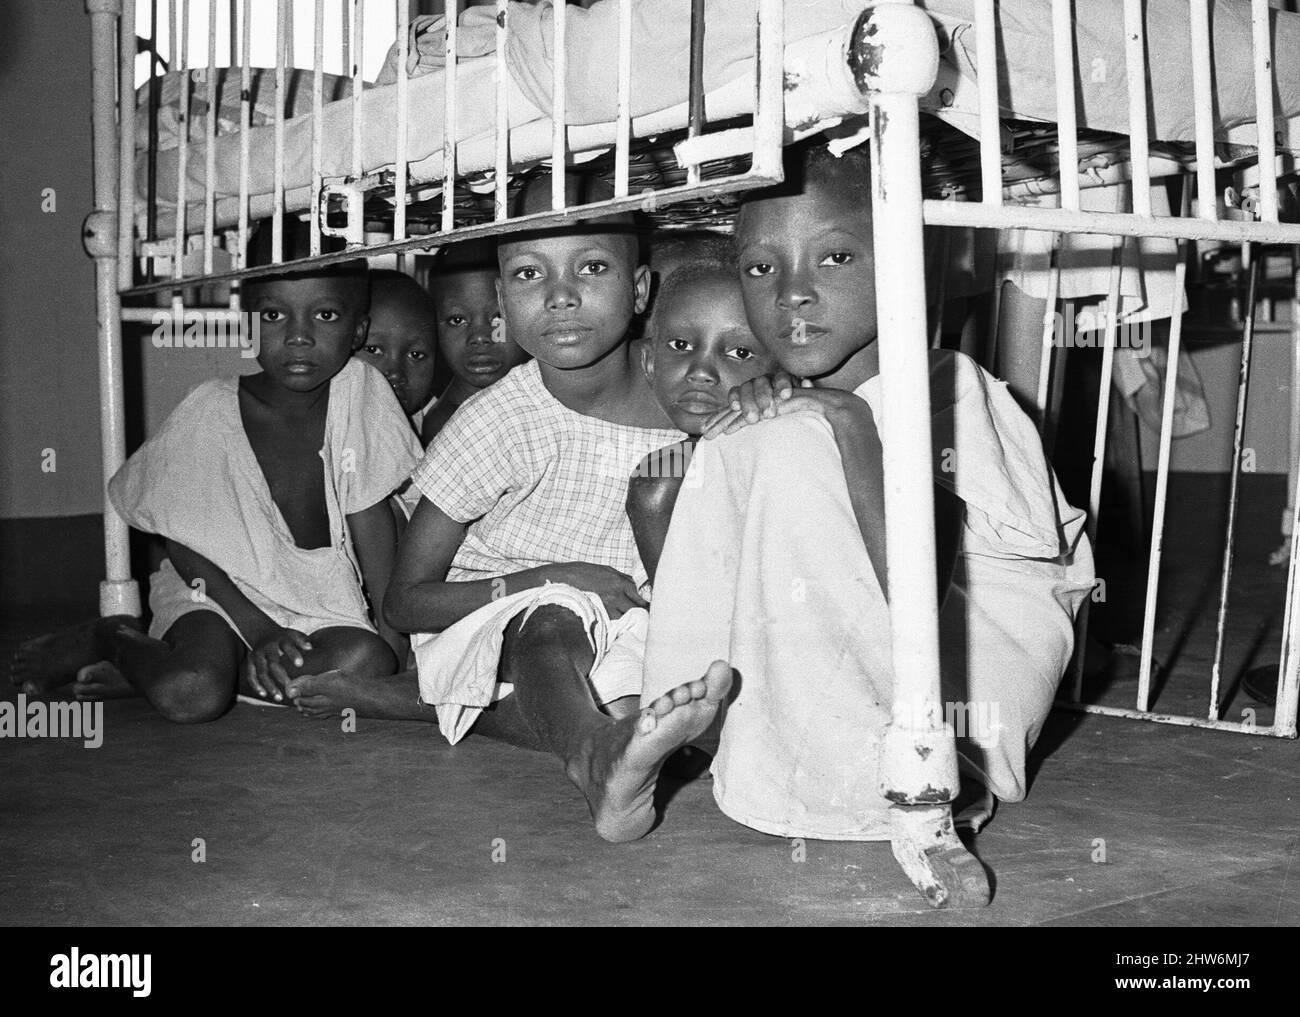 Children suffering from malnutrition hide under a cot during an air raid at Queen Elizabeth Hospital, Umuahia just one of the estimated one to two million victims of the Biafran War. 11th June 1968The Nigerian Civil War, also known as the Biafran War endured for two and a half years, from  6 July 1967 to 15 January 1970, and was fought to counter the secession of Biafra from Nigeria. The indigenous Igbo people of Biafra felt they could no longer co-exist with the Northern-dominated federal government following independence from Great Britain. Political, economic, ethnic, cultural and religious Stock Photo